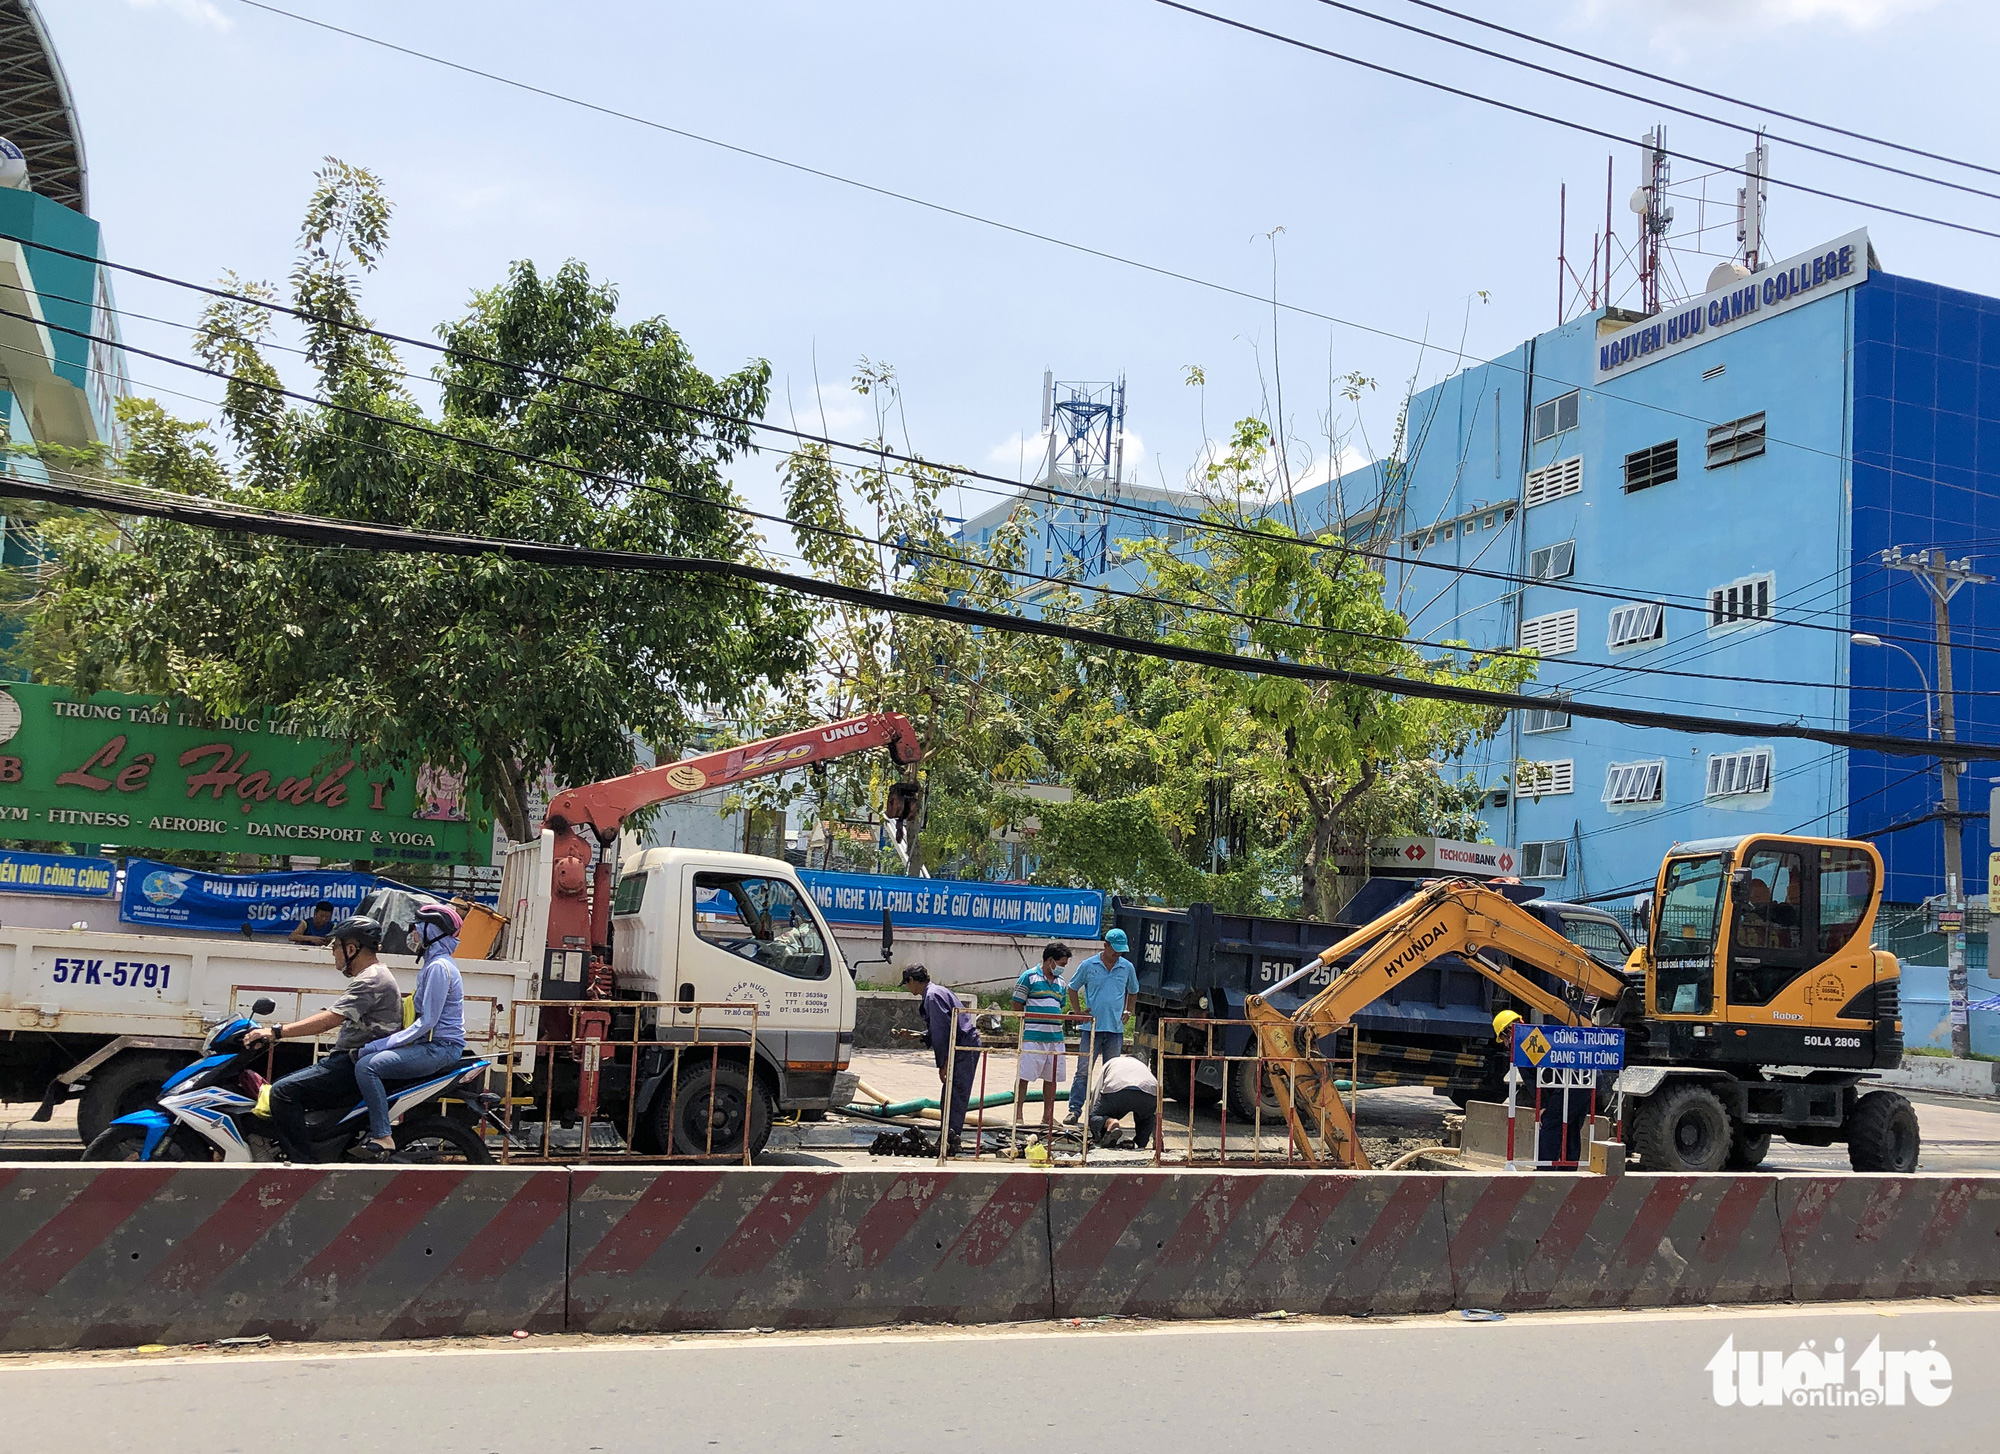 Workers and vehicles work at the site of a sinkhole on Huynh Tan Phat Street in District 7, Ho Chi Minh City, April 16, 2021. Photo: Chau Tuan / Tuoi Tre